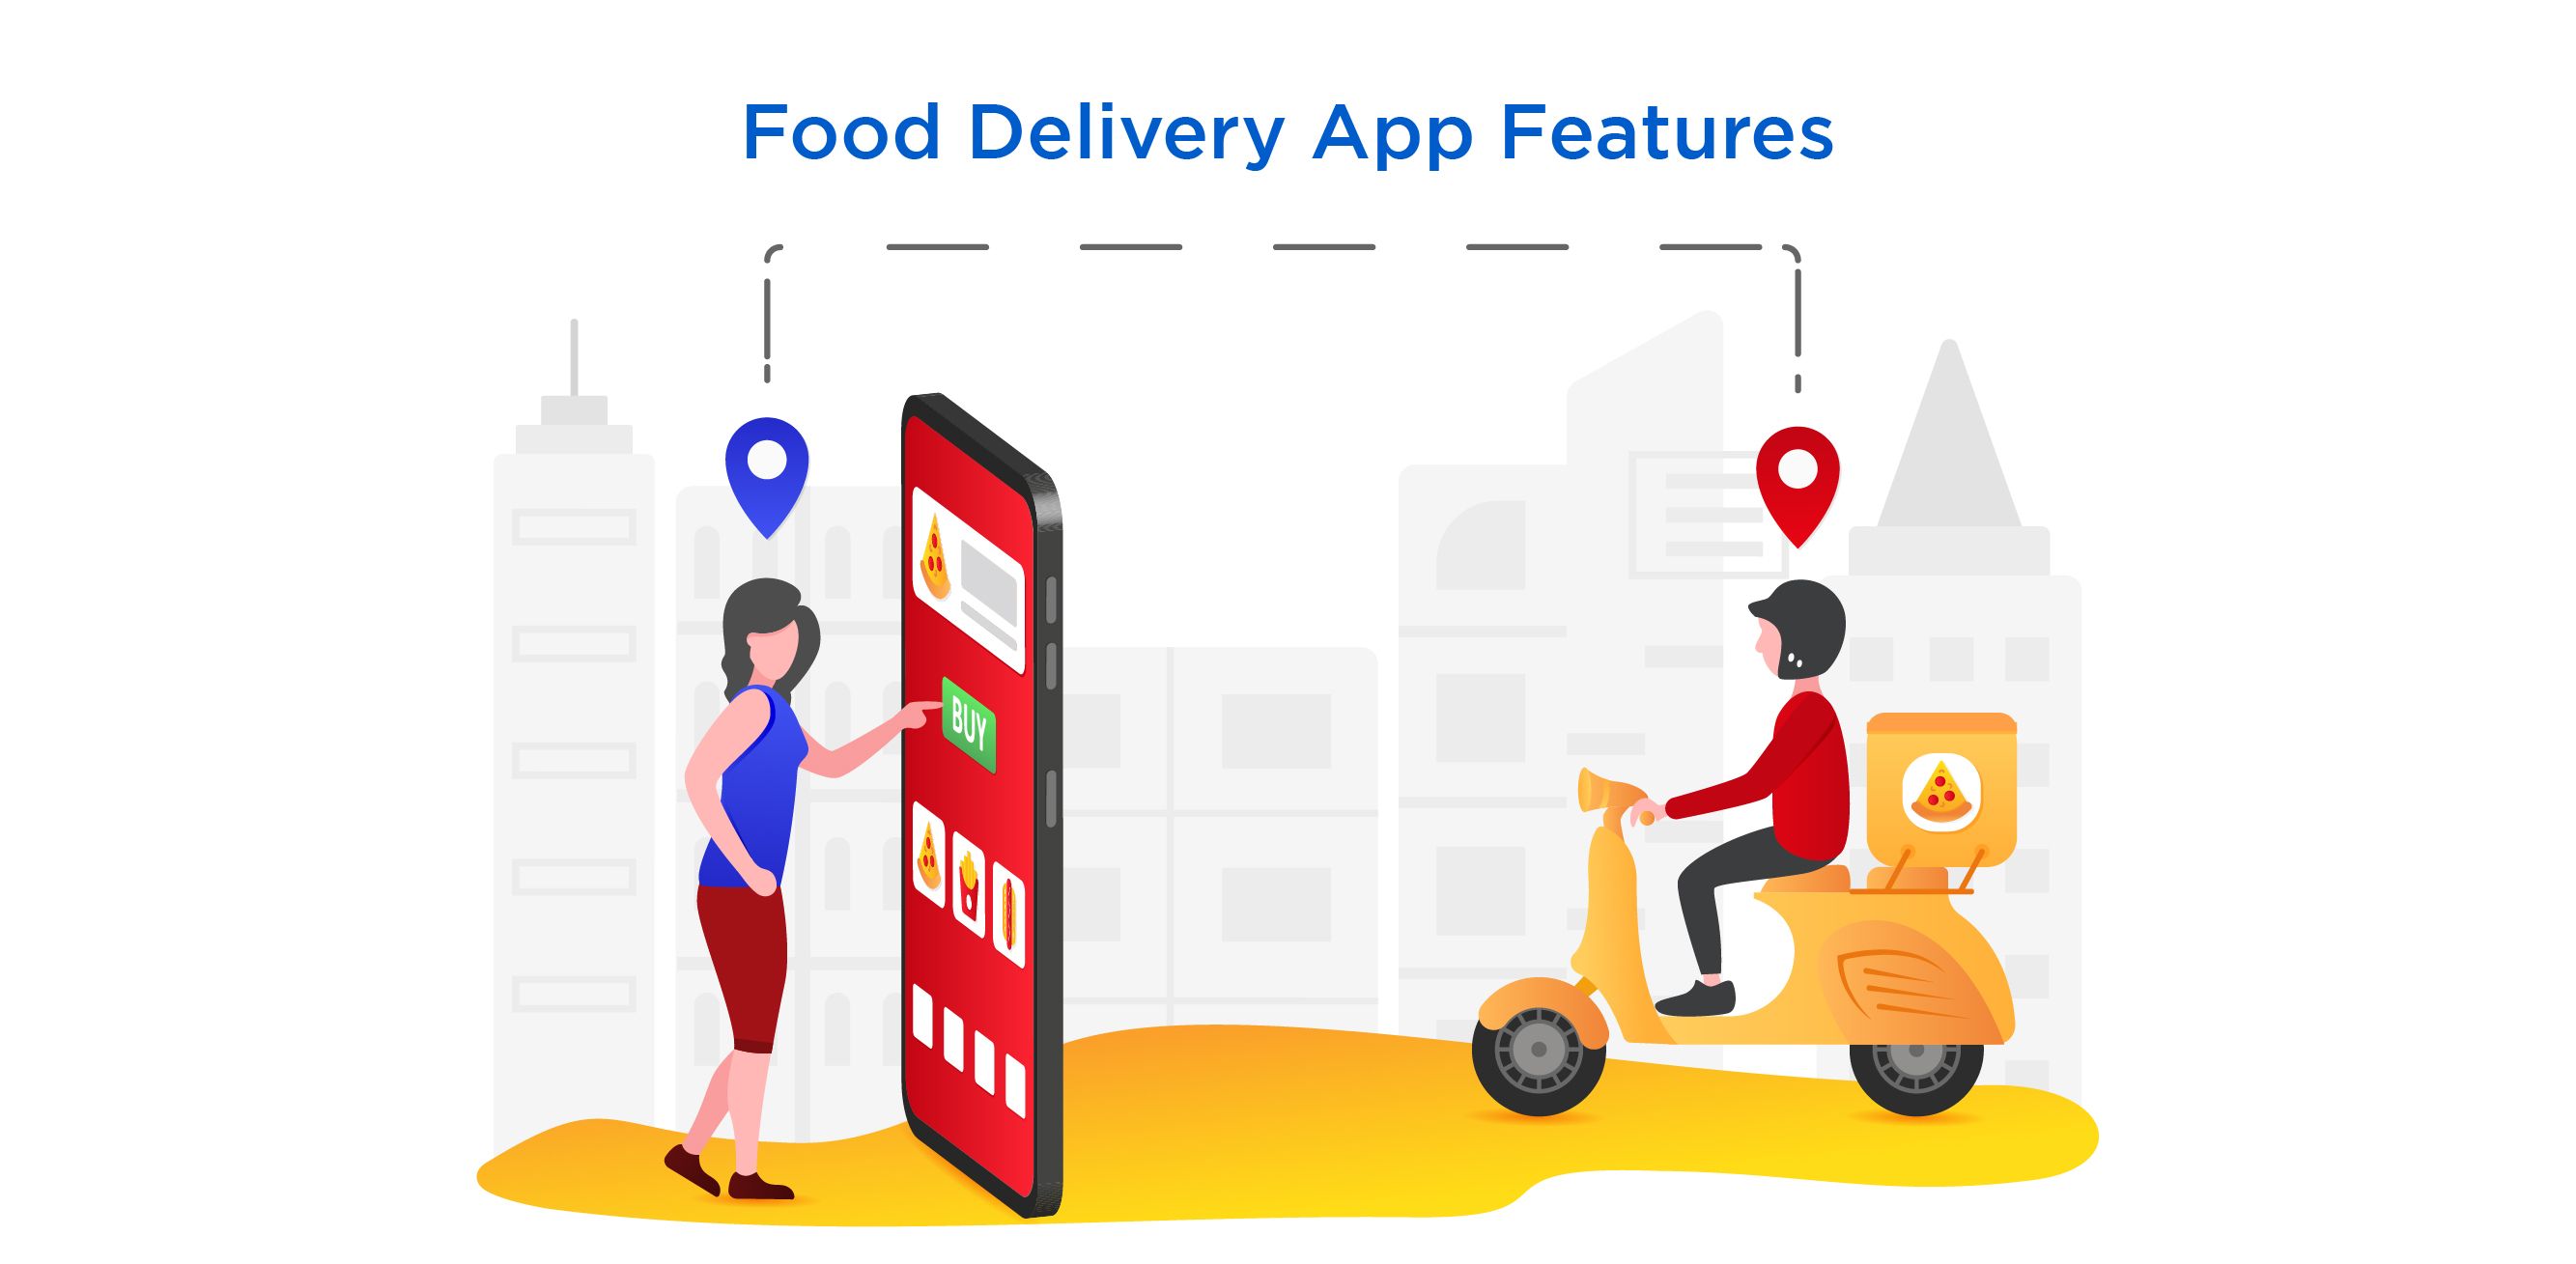 Food Delivery App Features